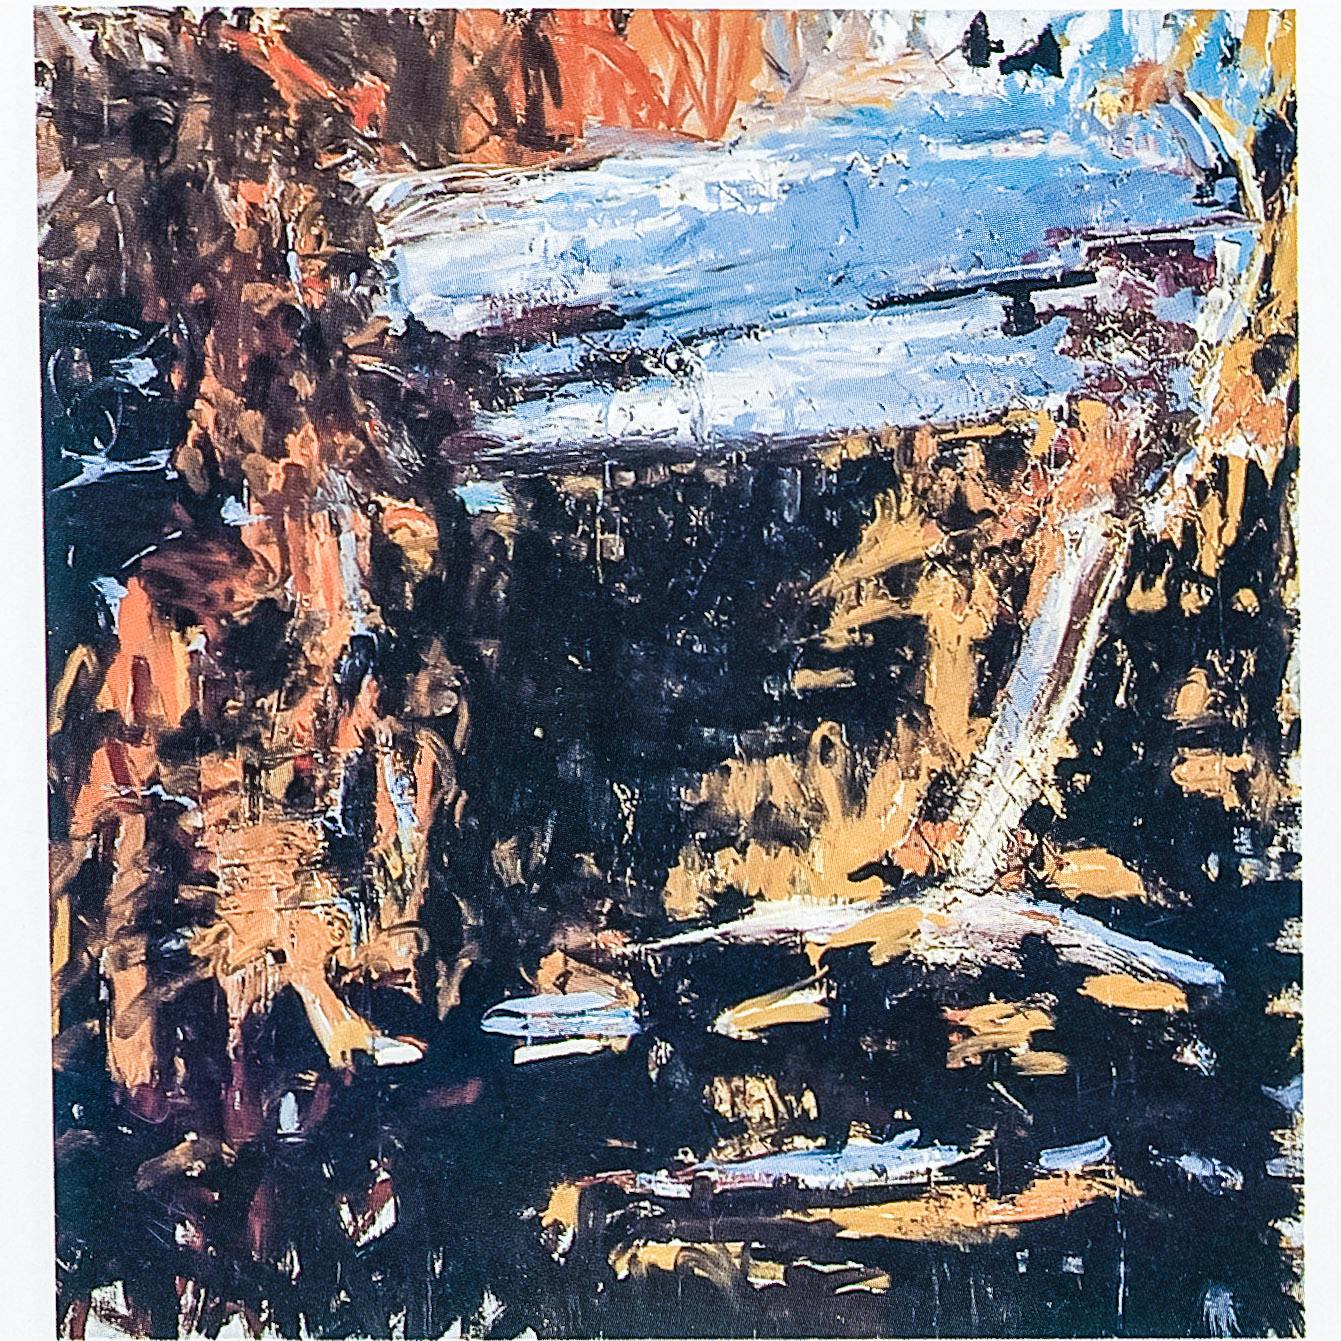 A square, abstract painting made with short gestural brush strokes, and scratches. The colours present in the painting are black, yellow, orange, white, and blue.